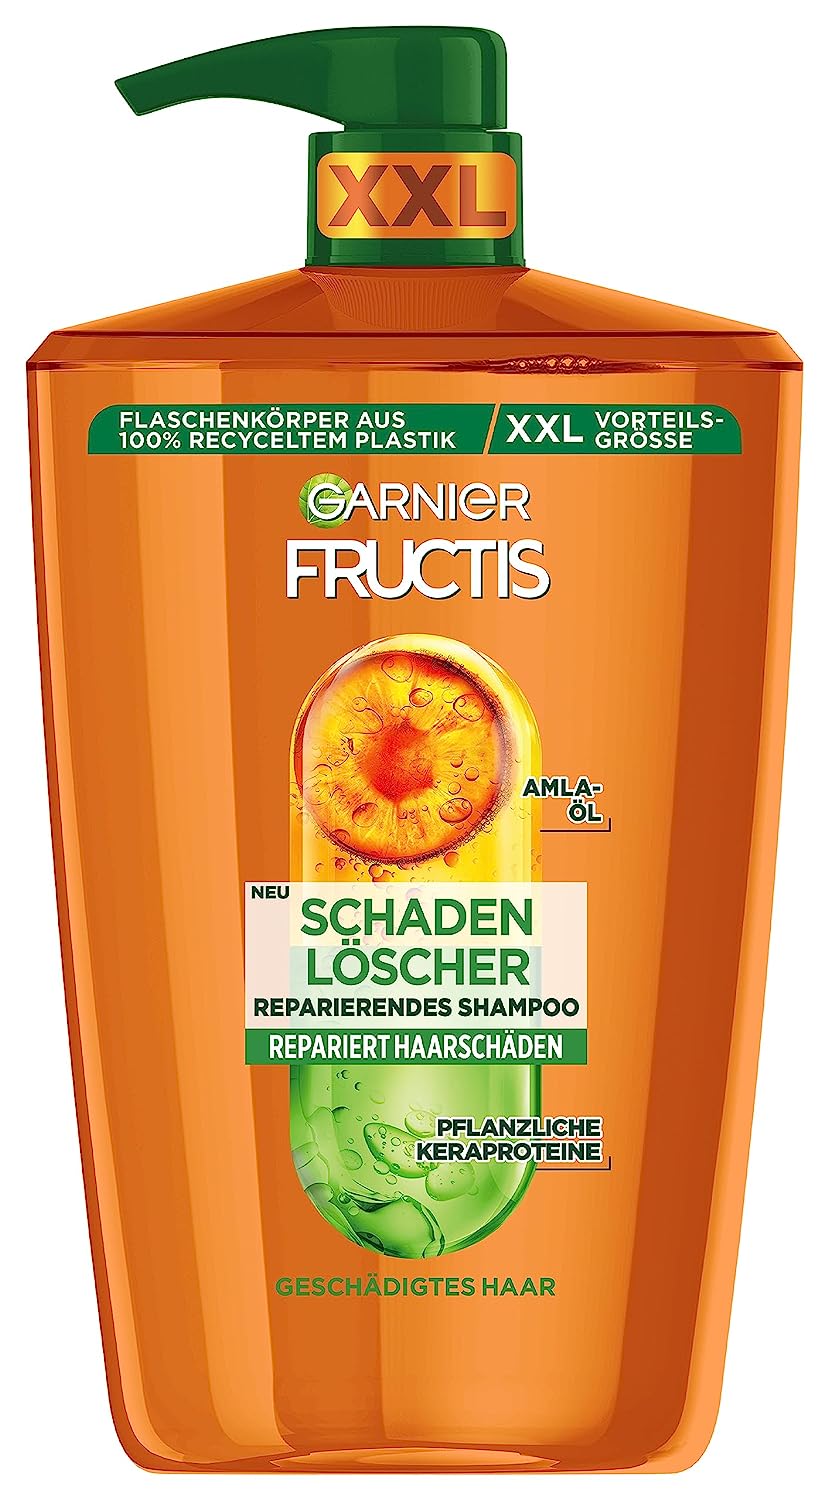 Garnier Fructis Damage Extinguisher Repair Shampoo for Damaged Hair, with Amla Oil and vegetable Kera Proteins for Less Split Ends 1000 ml